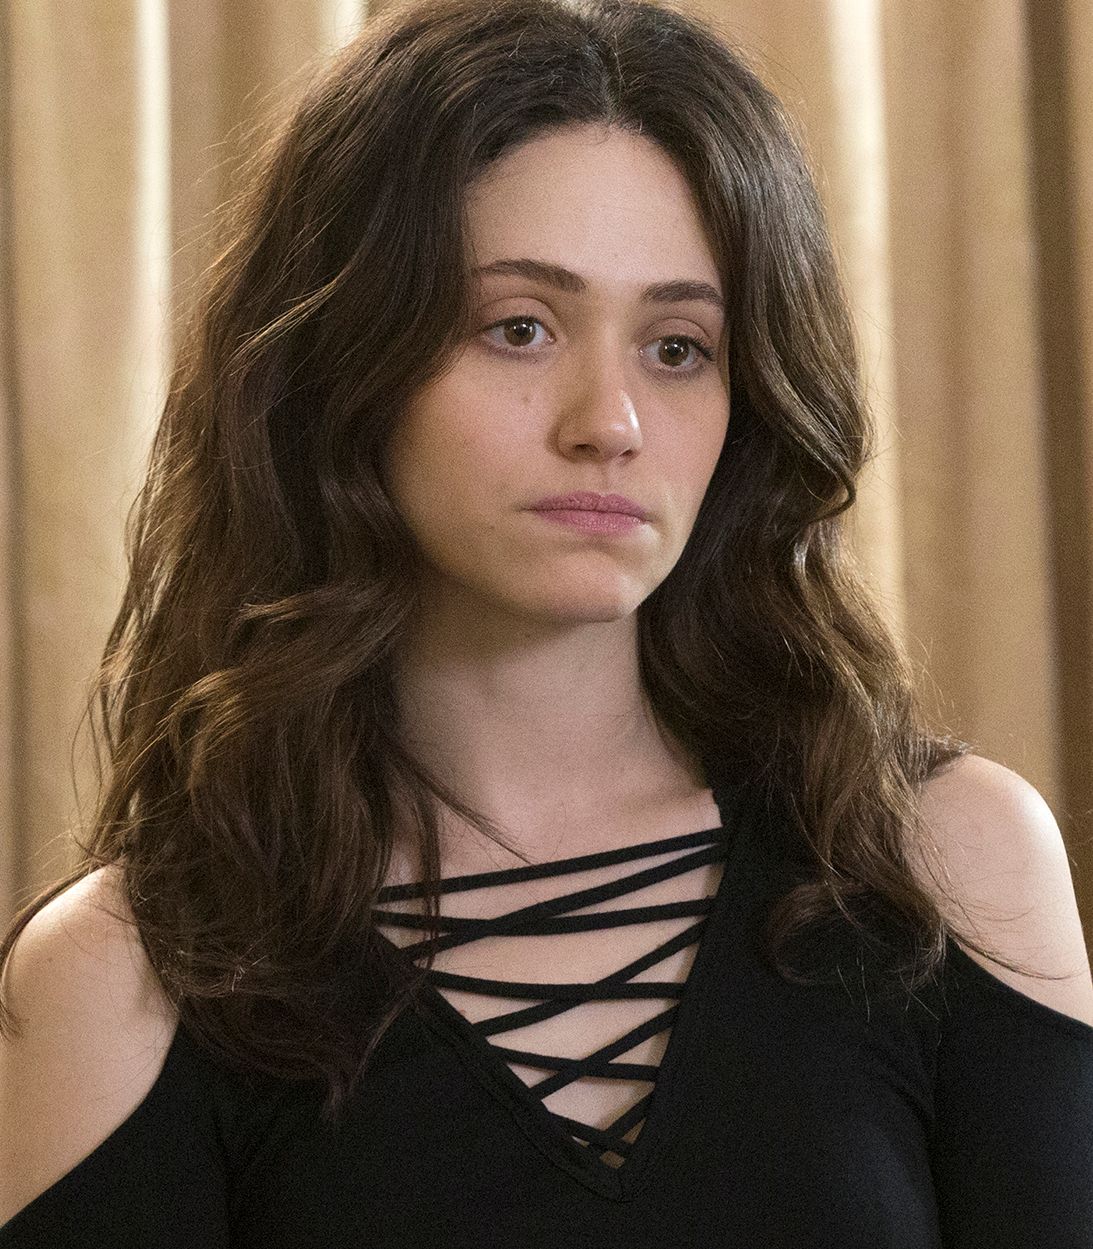 Shameless: Every Main Character's Fate At The End Of The Series